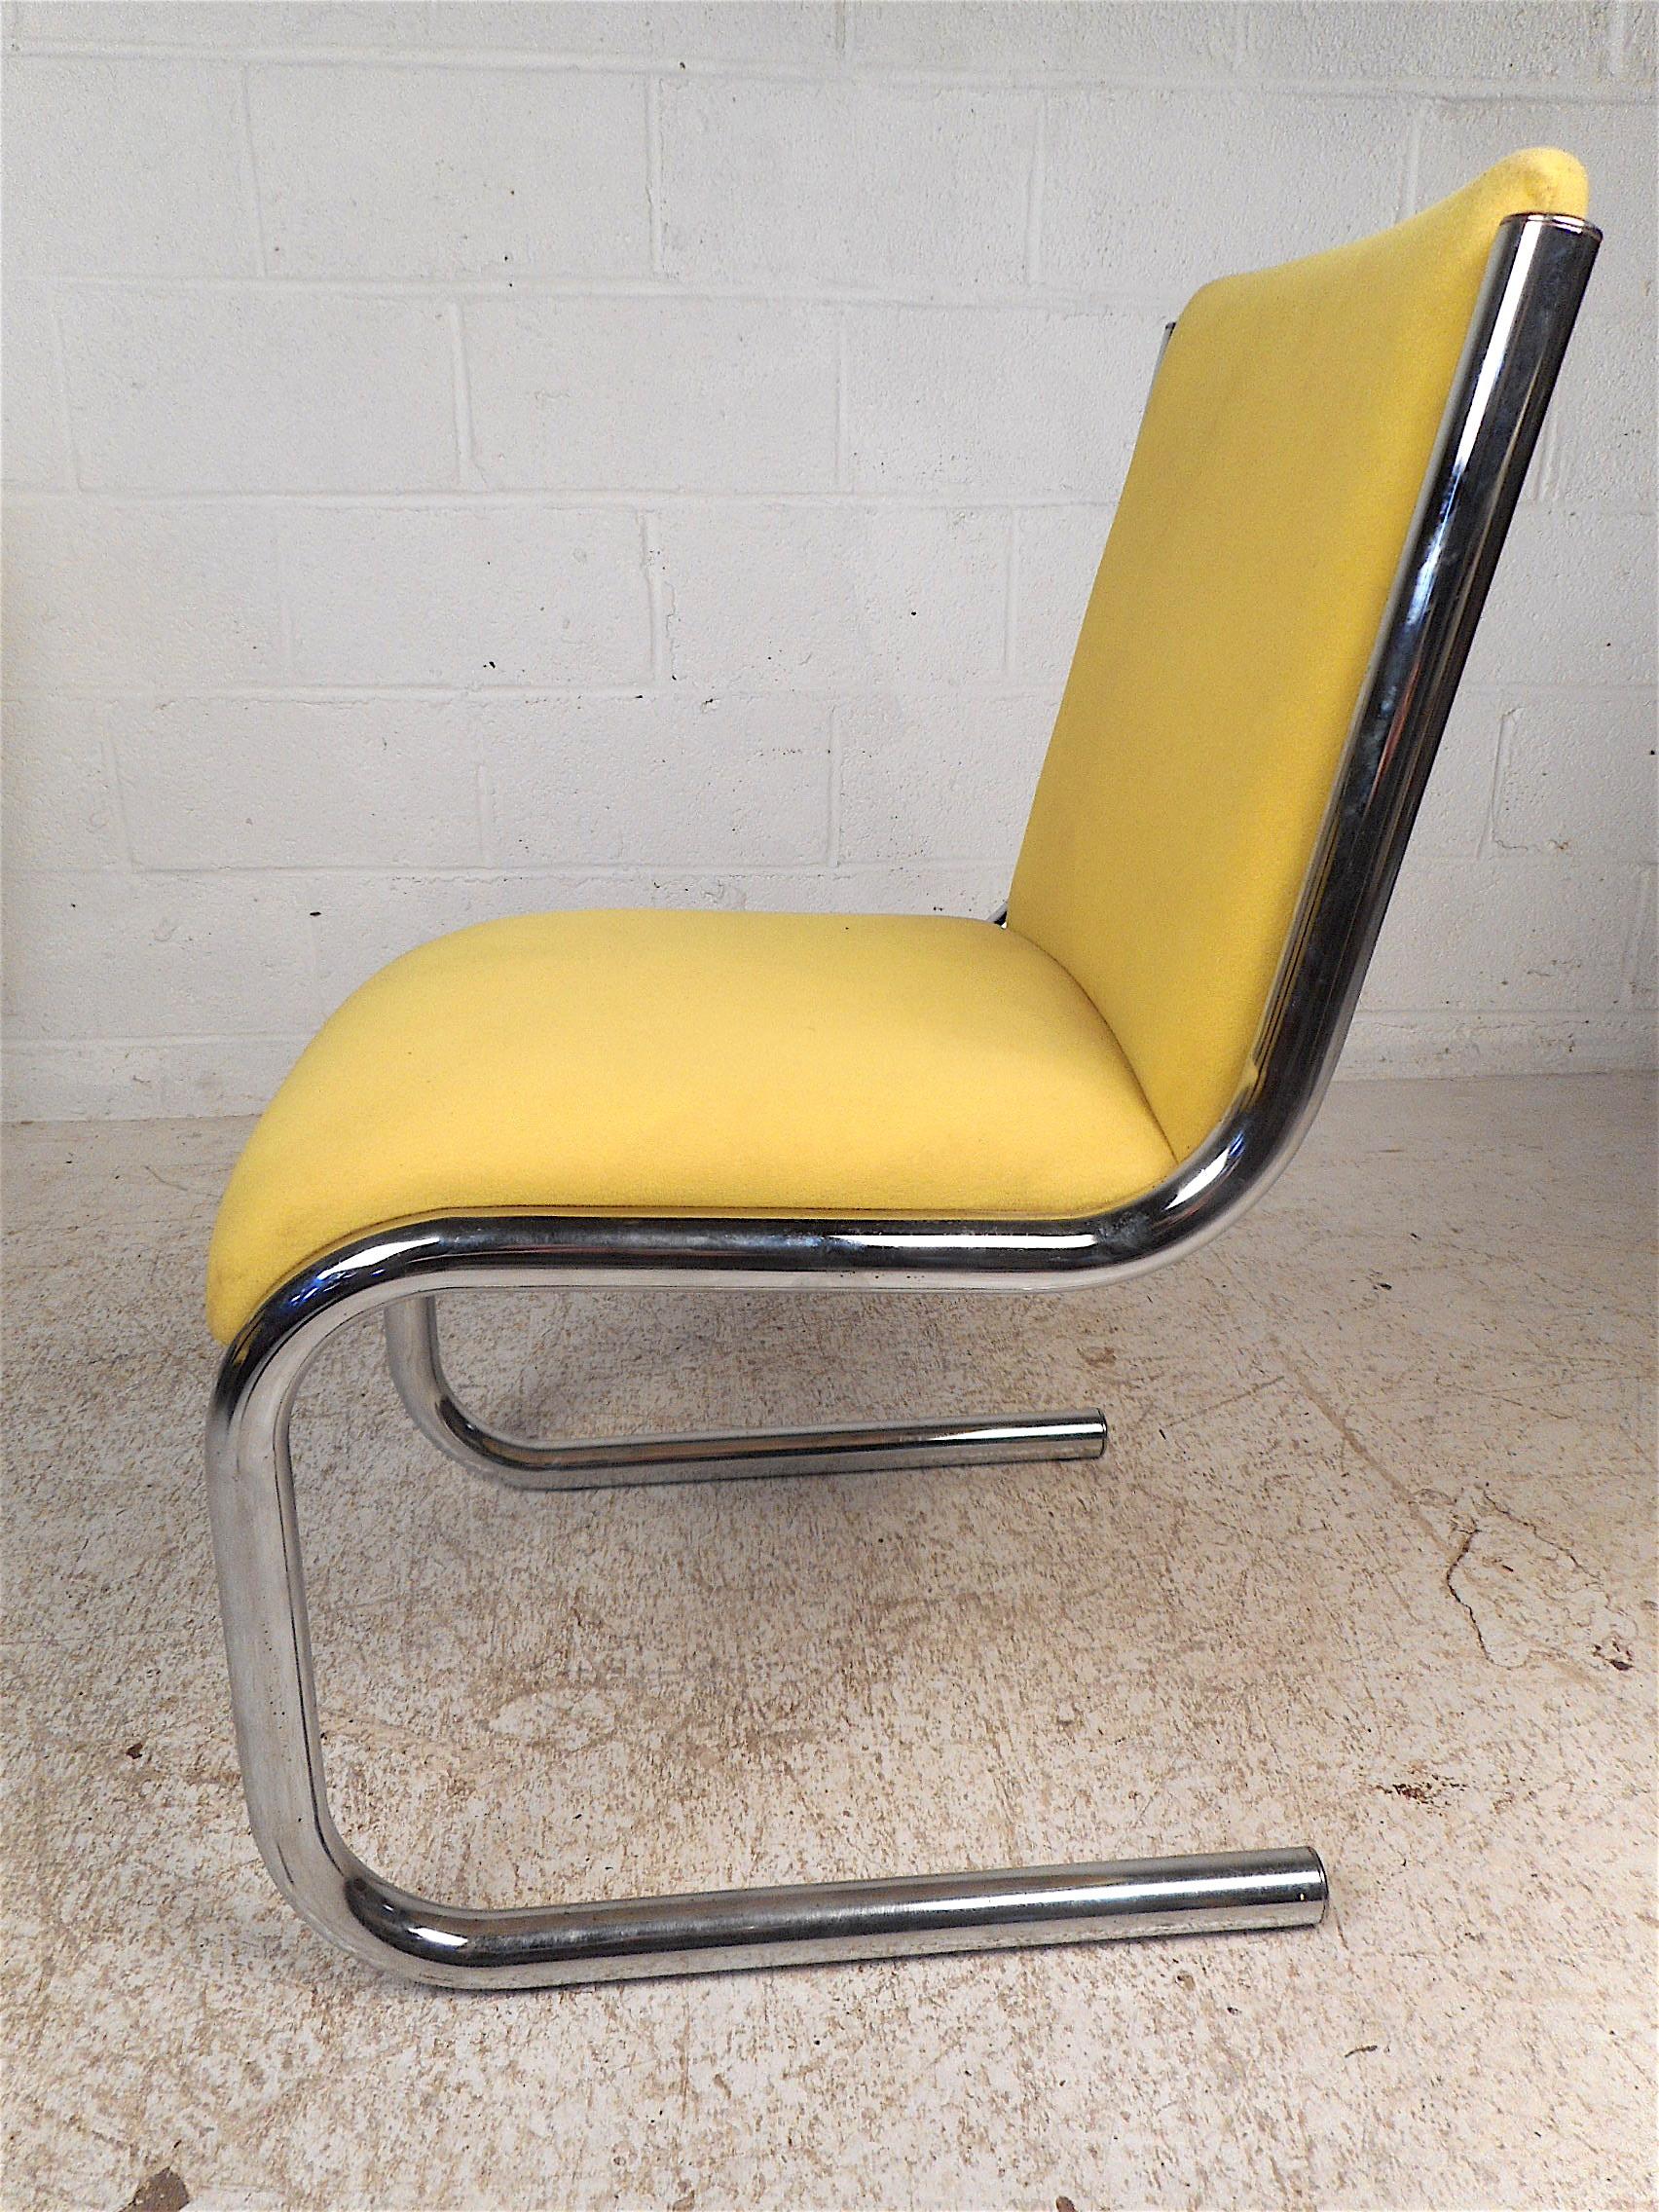 20th Century Midcentury Chrome Cantilevered Chairs, Set of 4